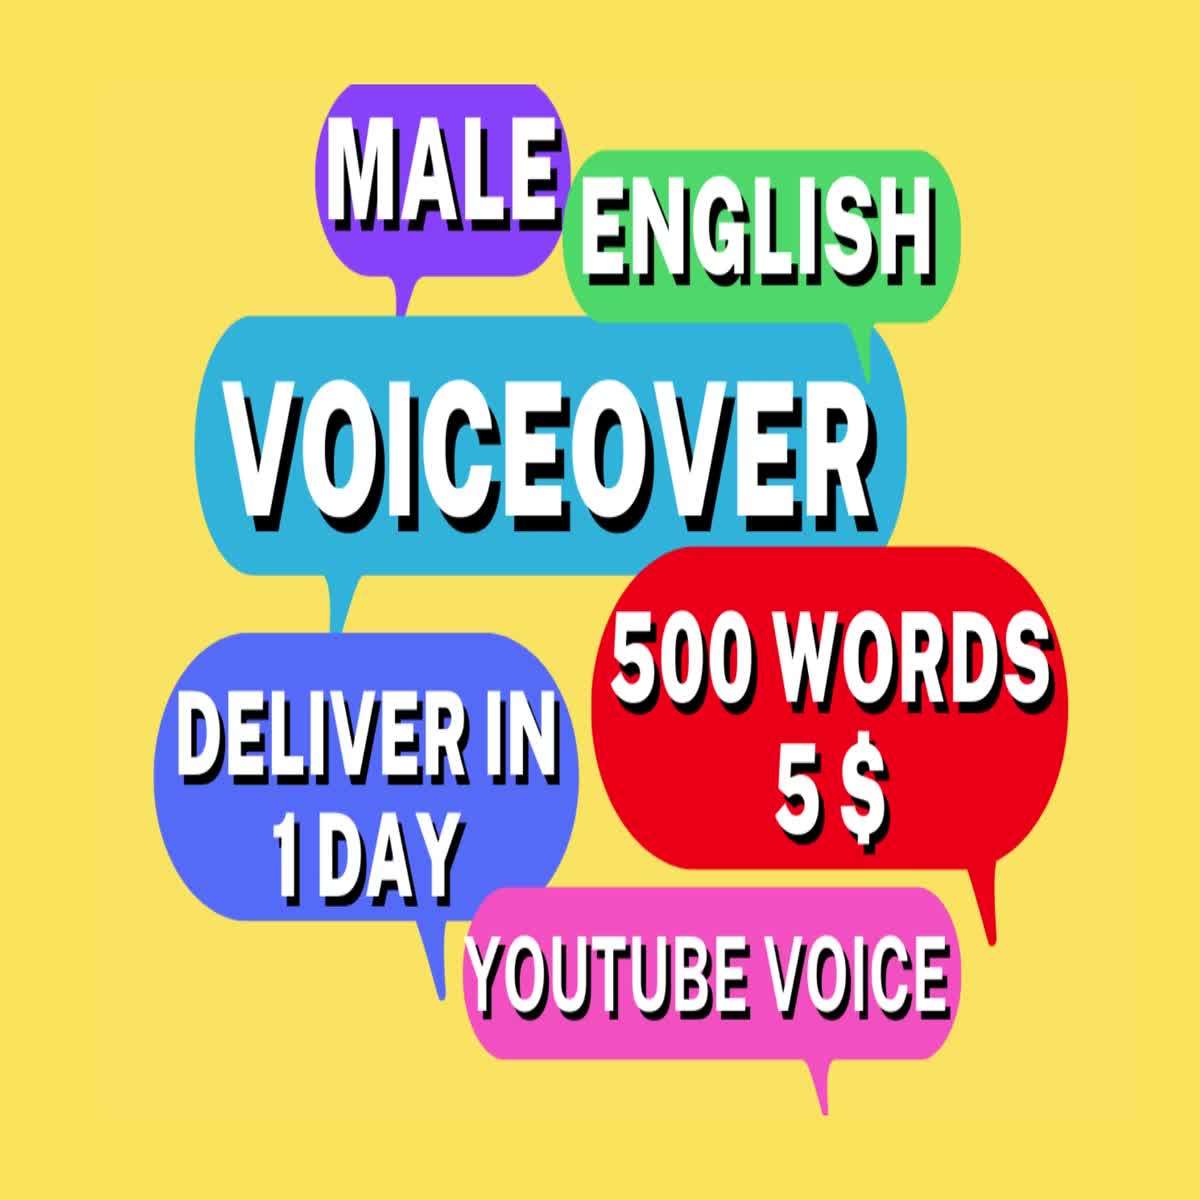 Record Male English voiceover audio to your script YouTube